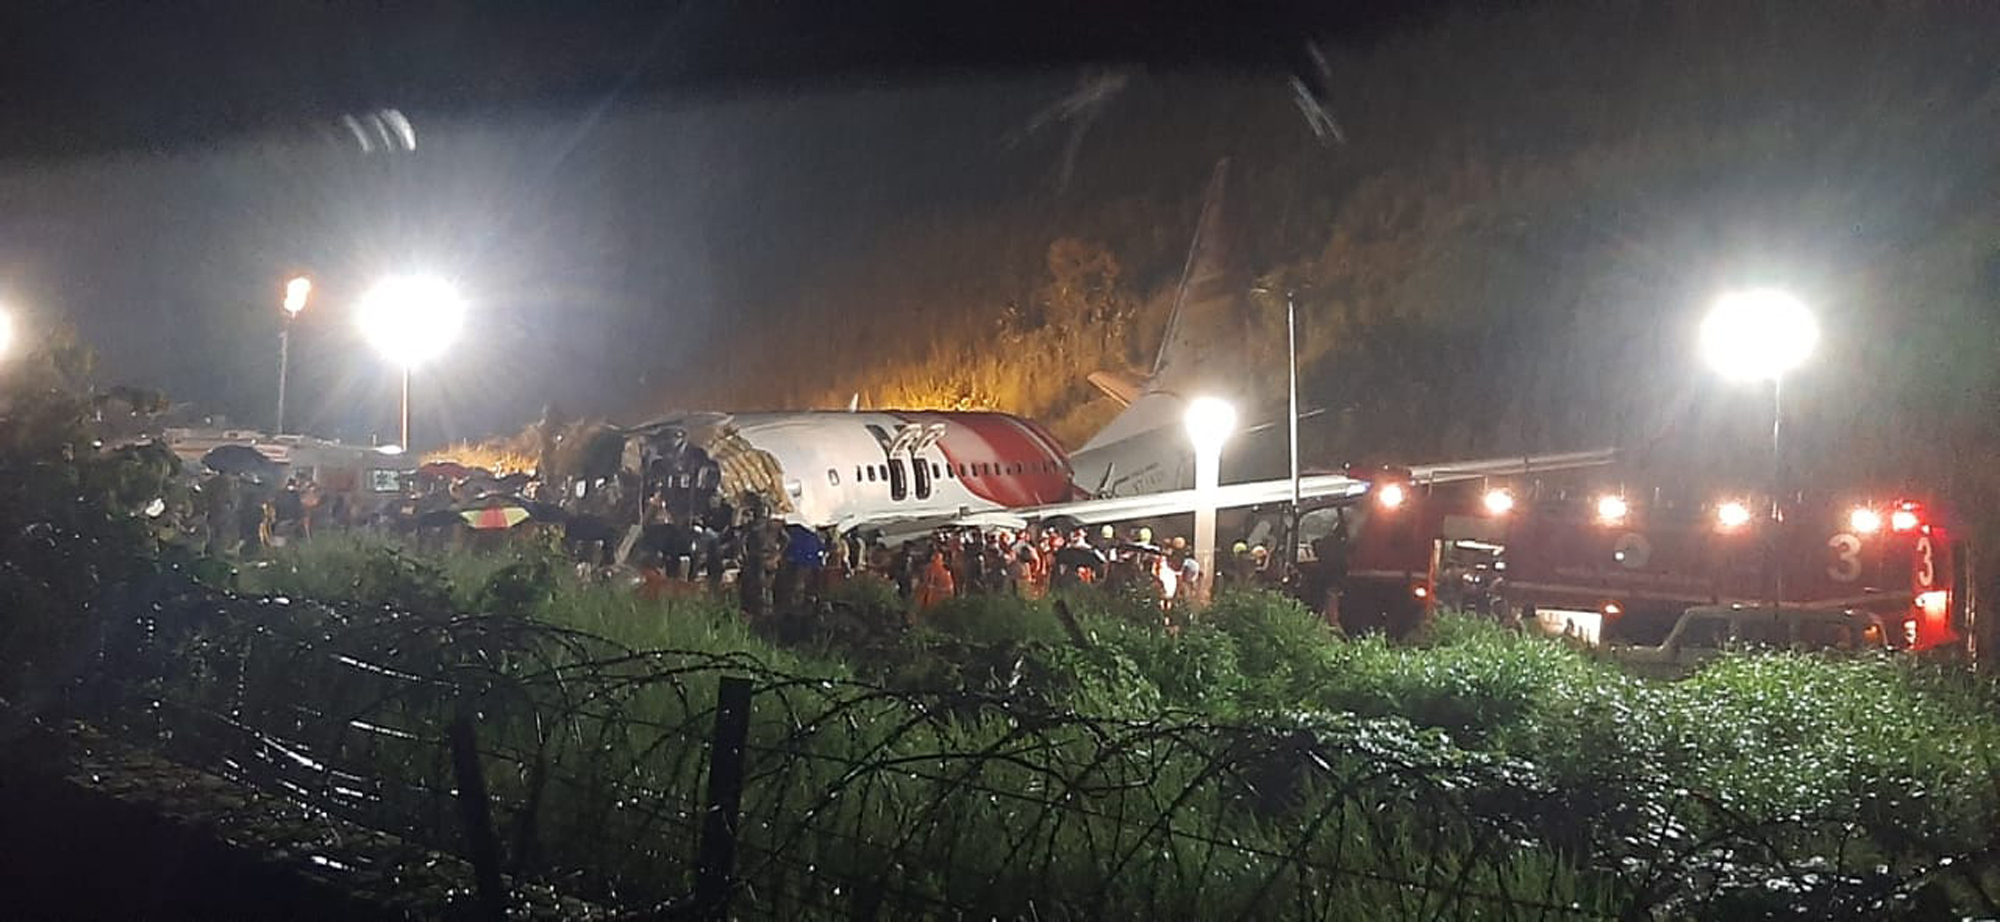 PHOTO: People gather around an Air India Express flight that skidded off a runway while landing at the airport in Kozhikode, Kerala state, India, Aug. 7, 2020.